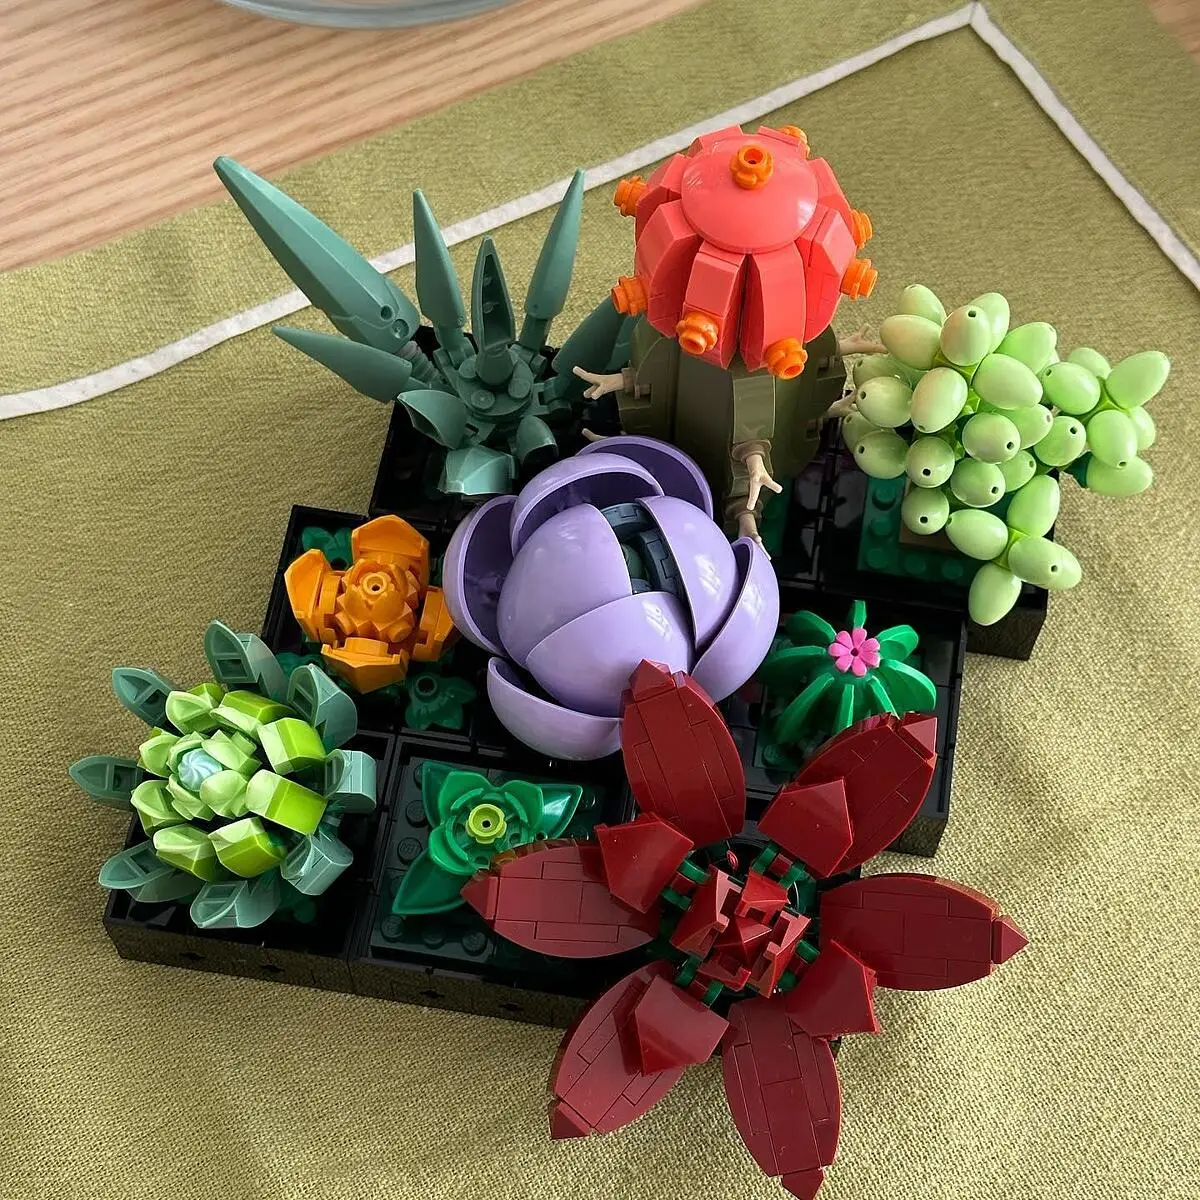 LEGO MOC Potted Cactus Moneybox by Famulimus